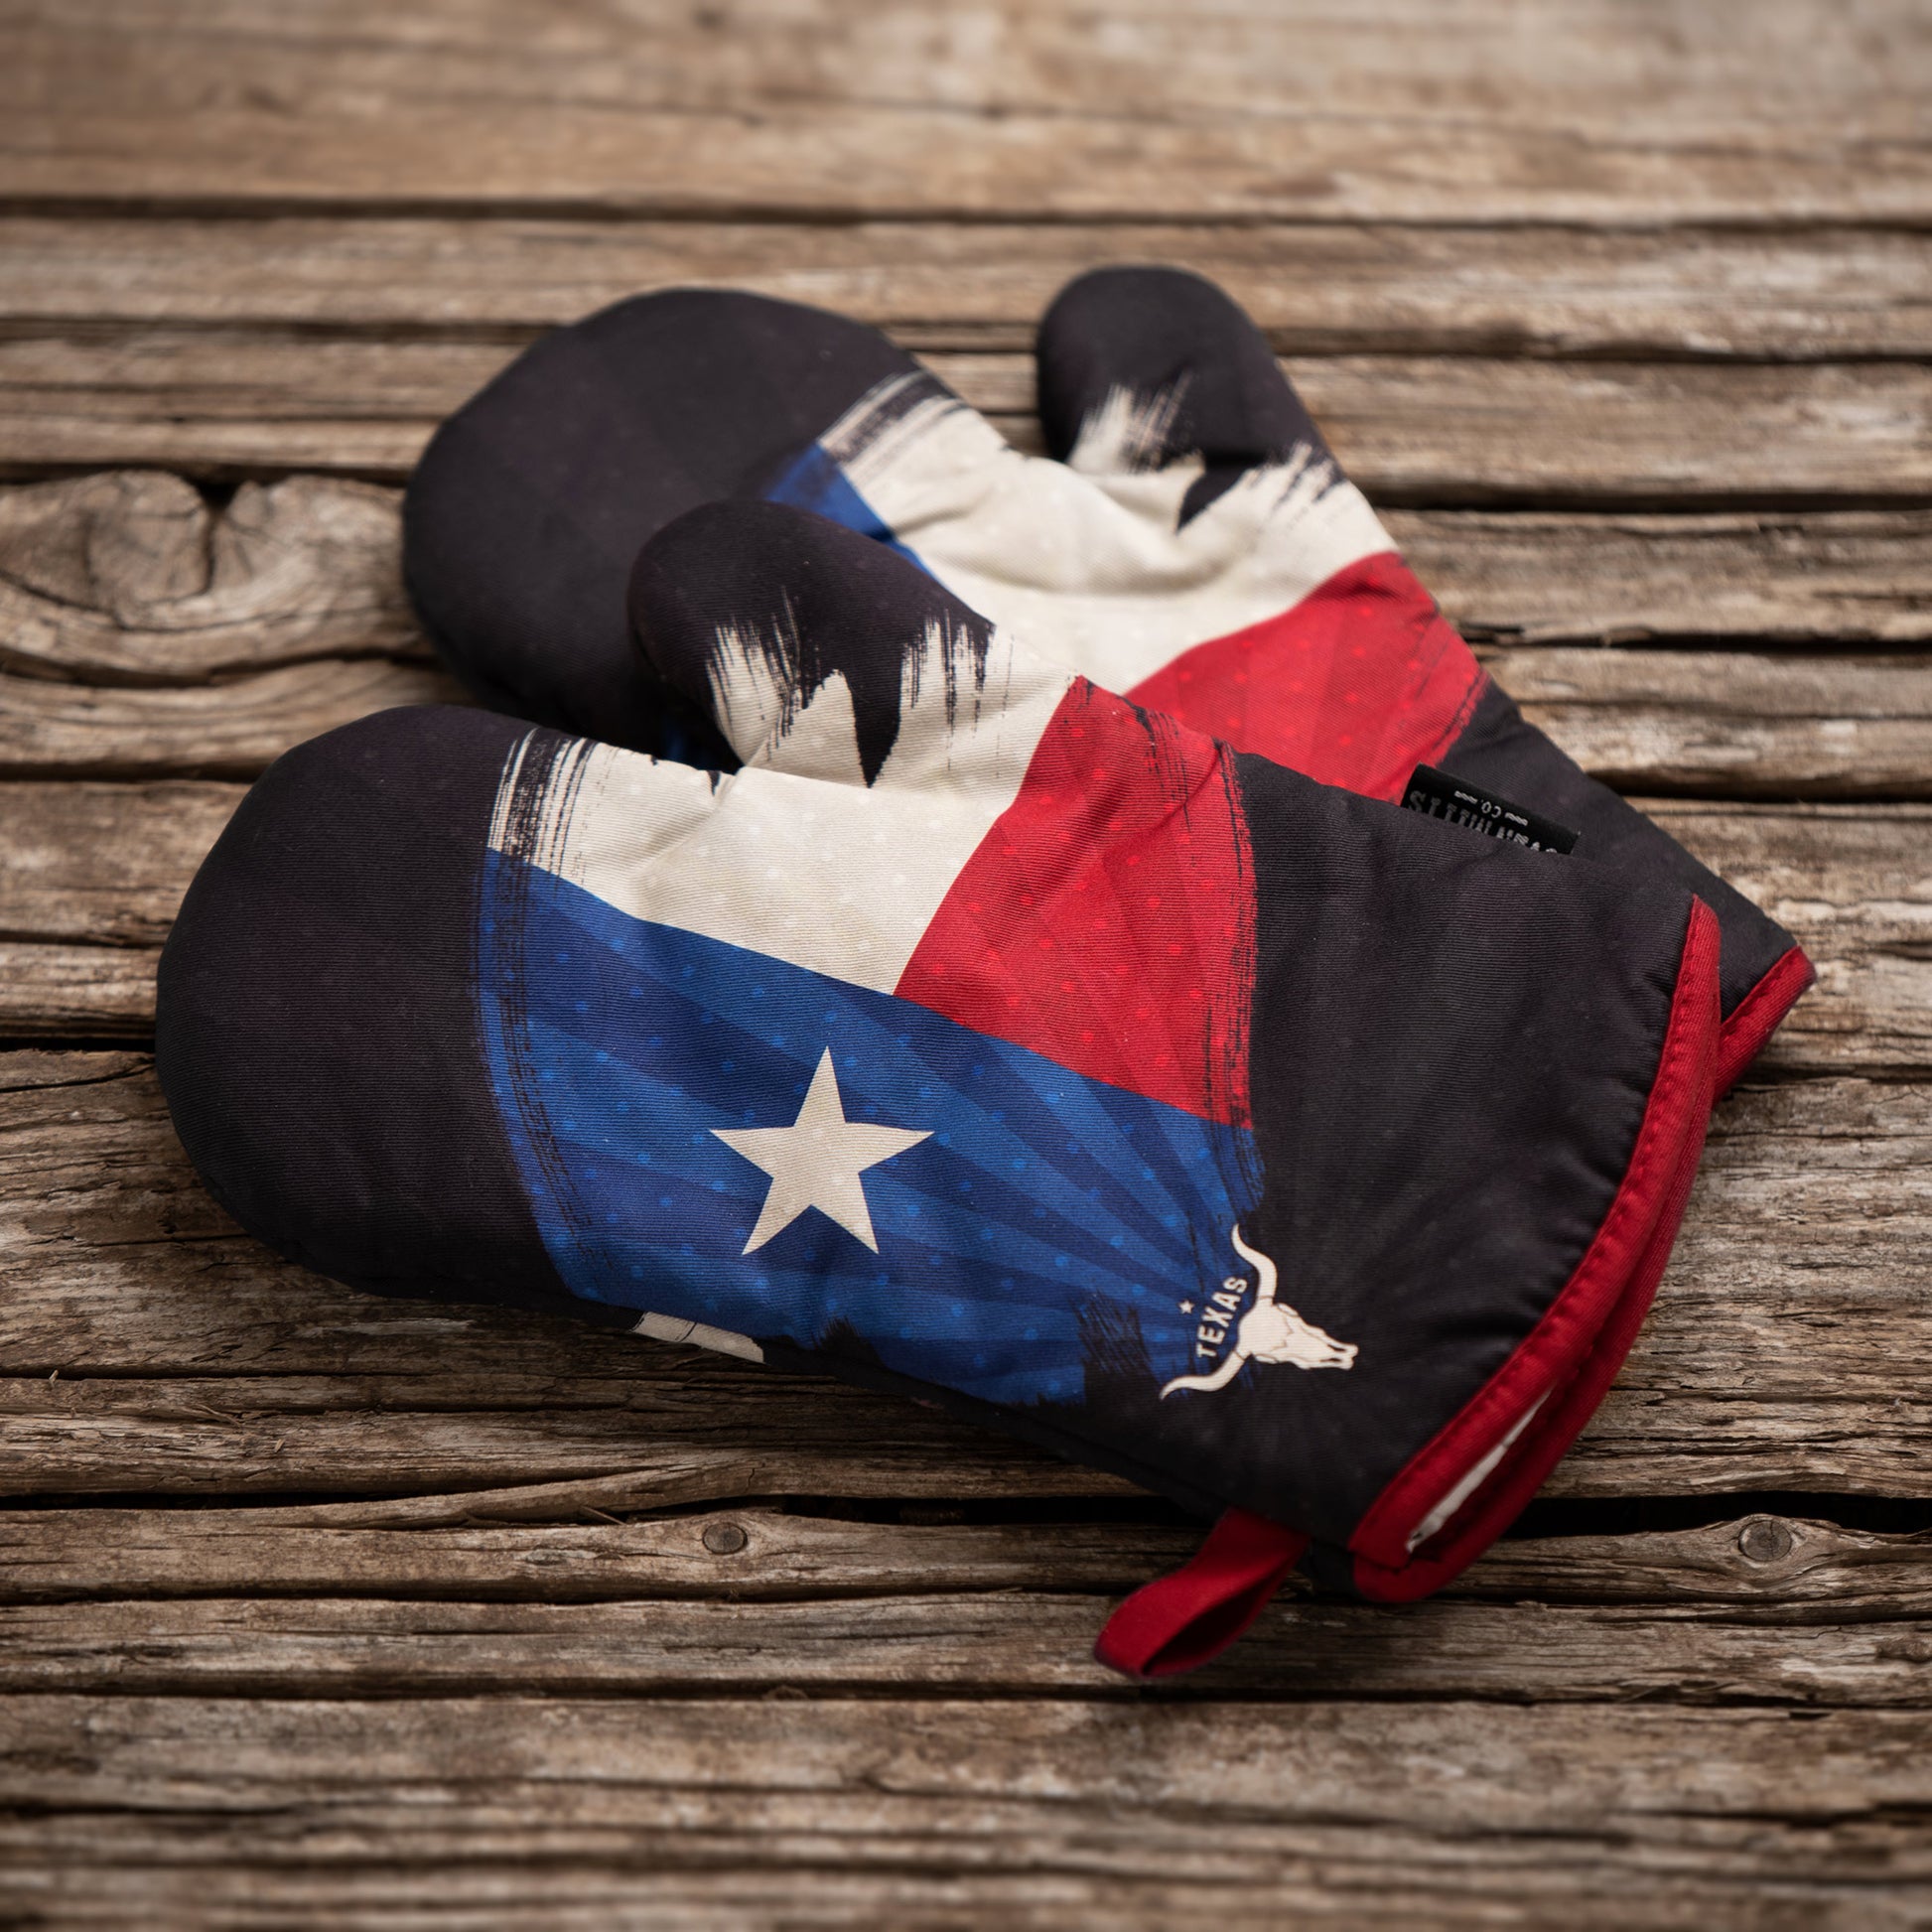 Texas Flag Oven Mitts And Pot Holder Set premium quality